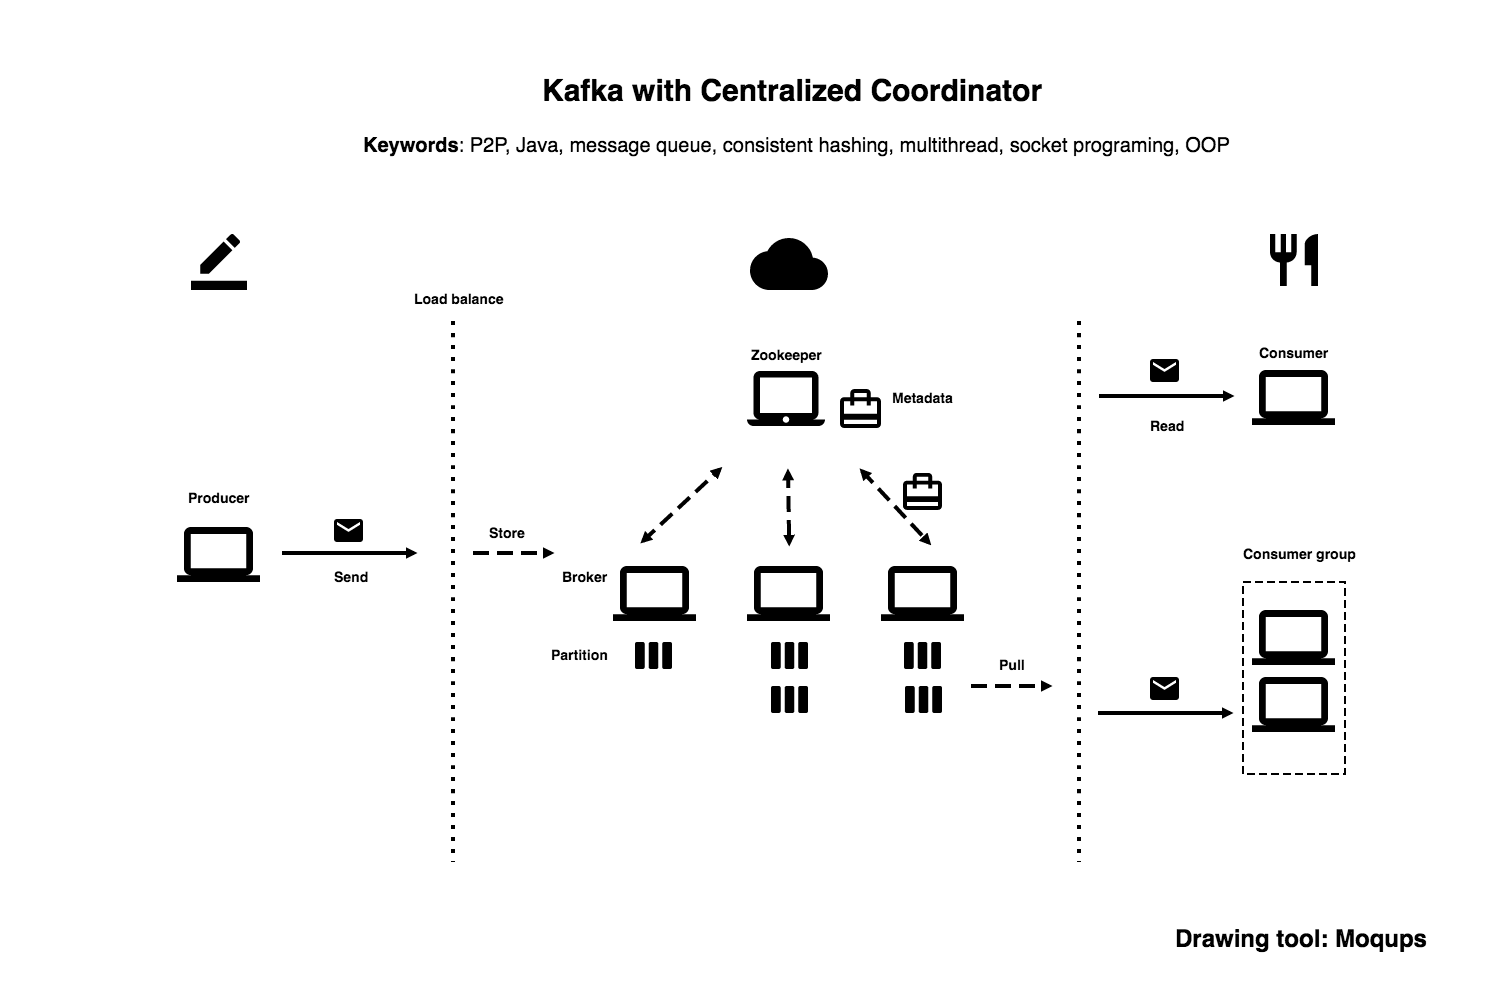 Kafka with Centralized Coordinator Overview